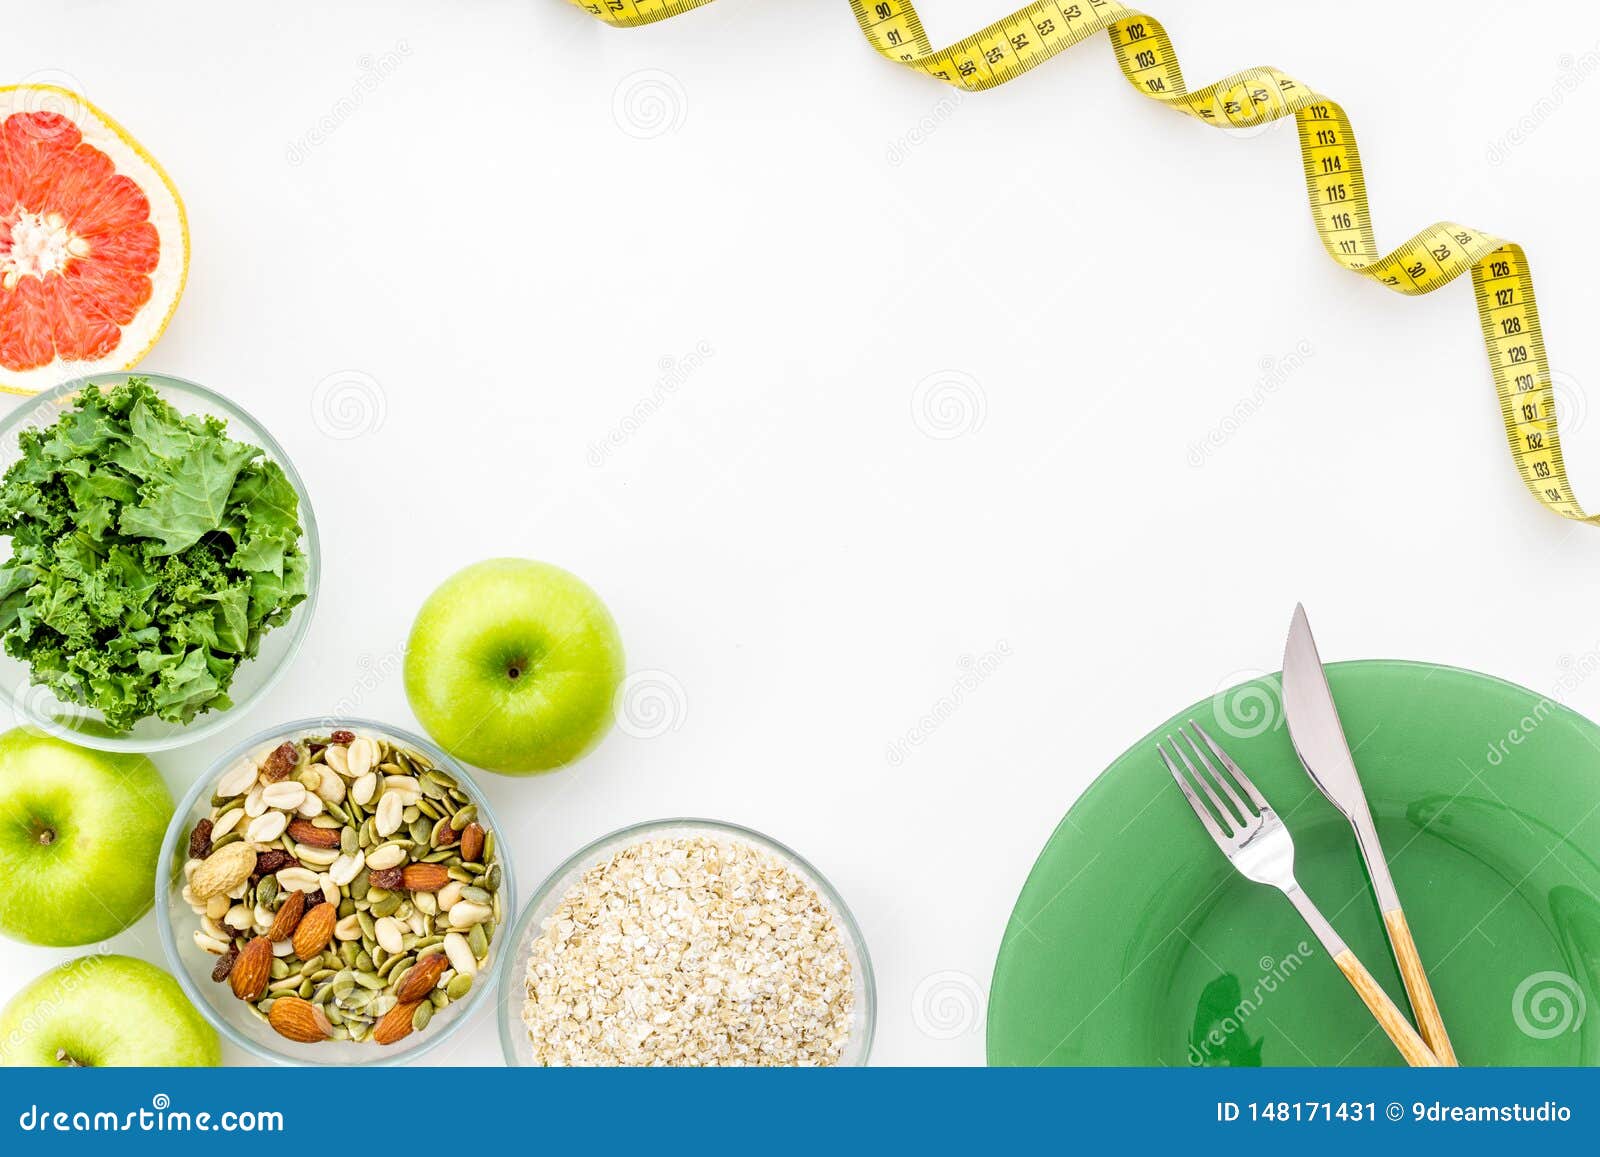 Download Measuring Tape, Apples, Oat Meal And Grapefruit For ...